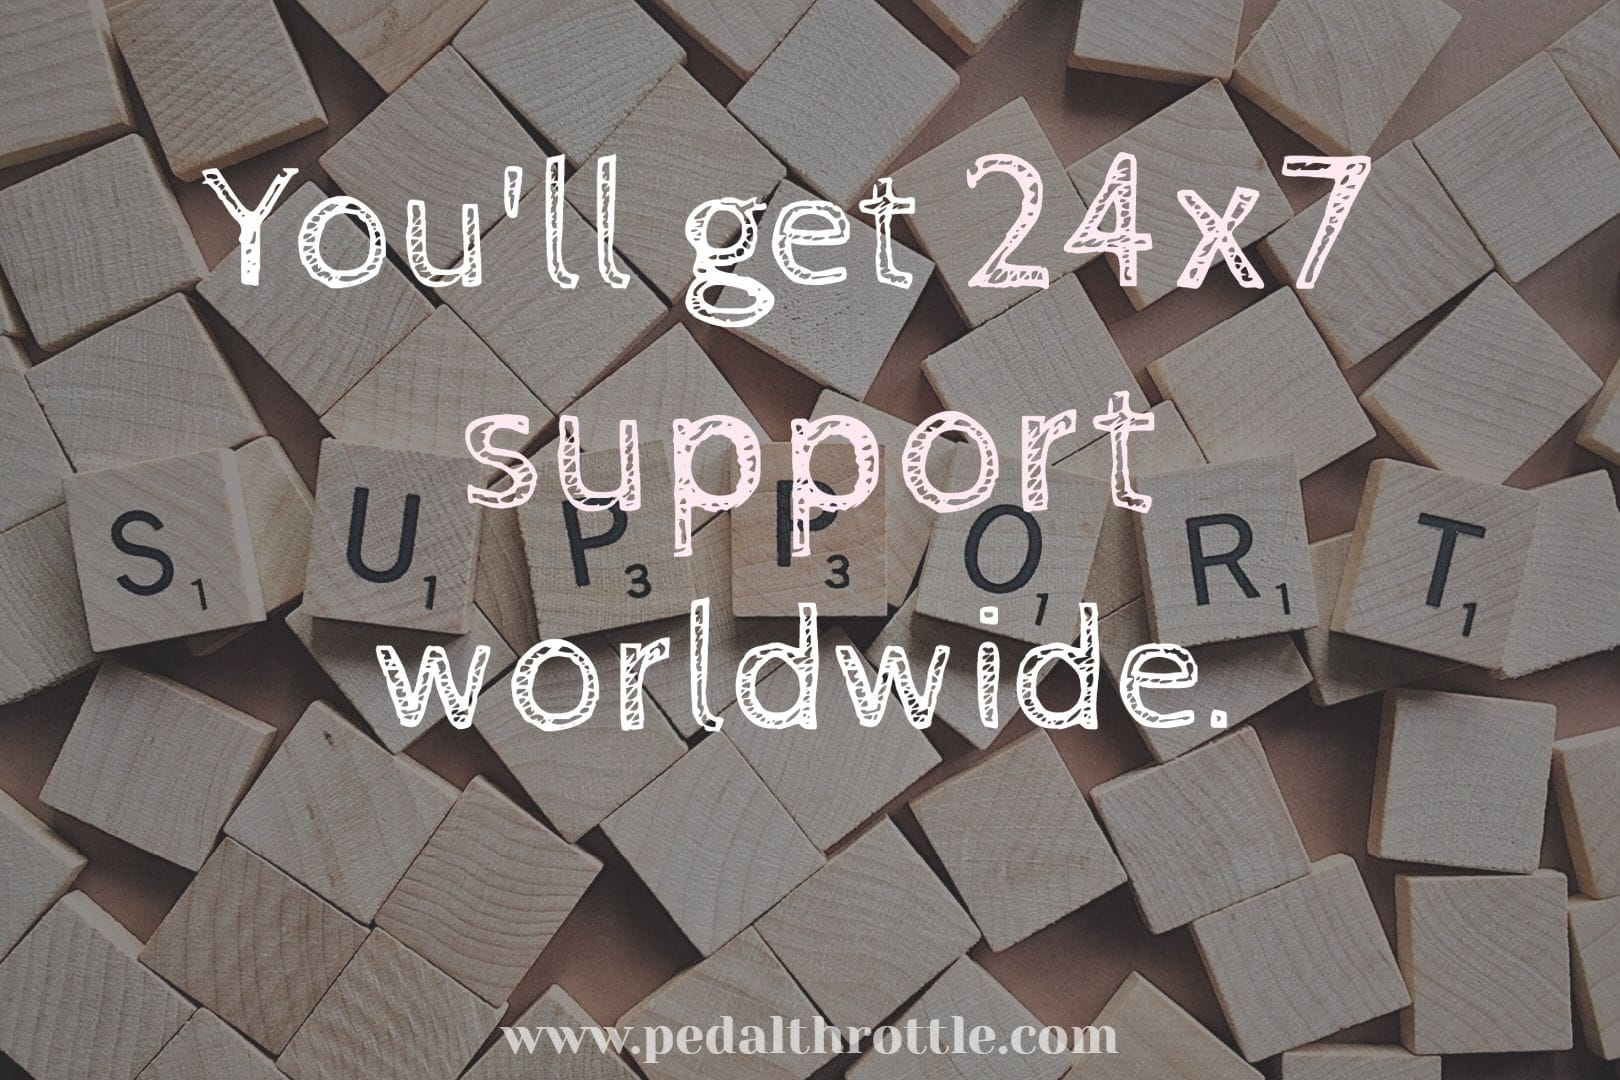 24*7 support